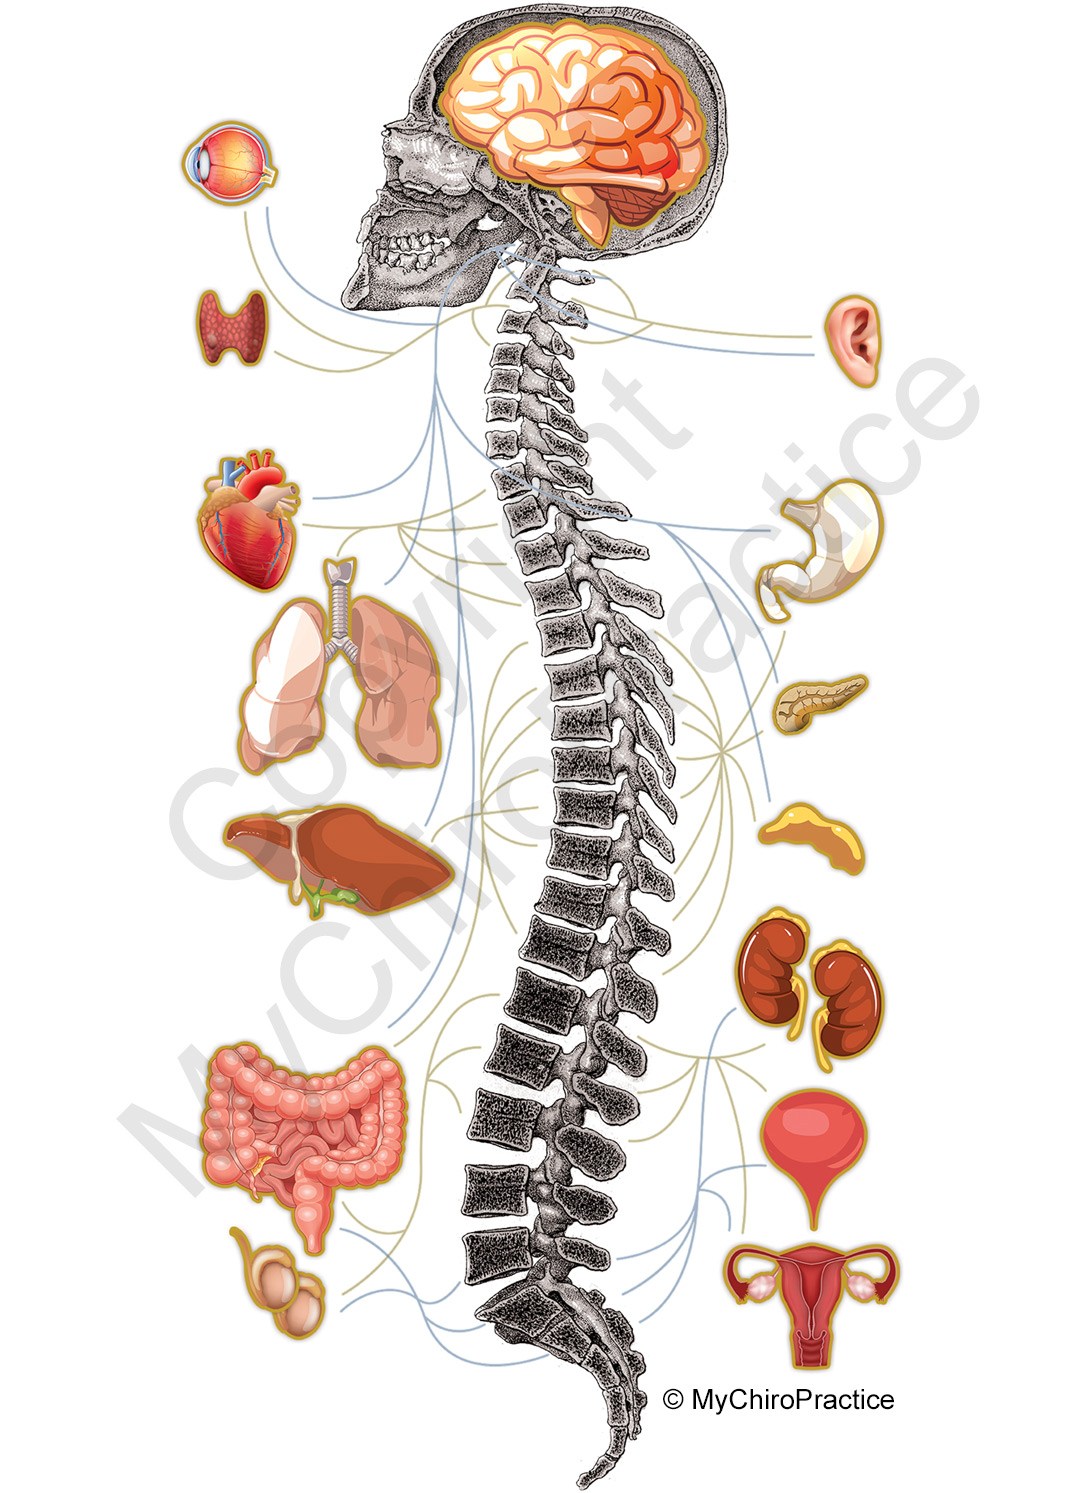 Spine and Nerve Chart by MyChiroPractice